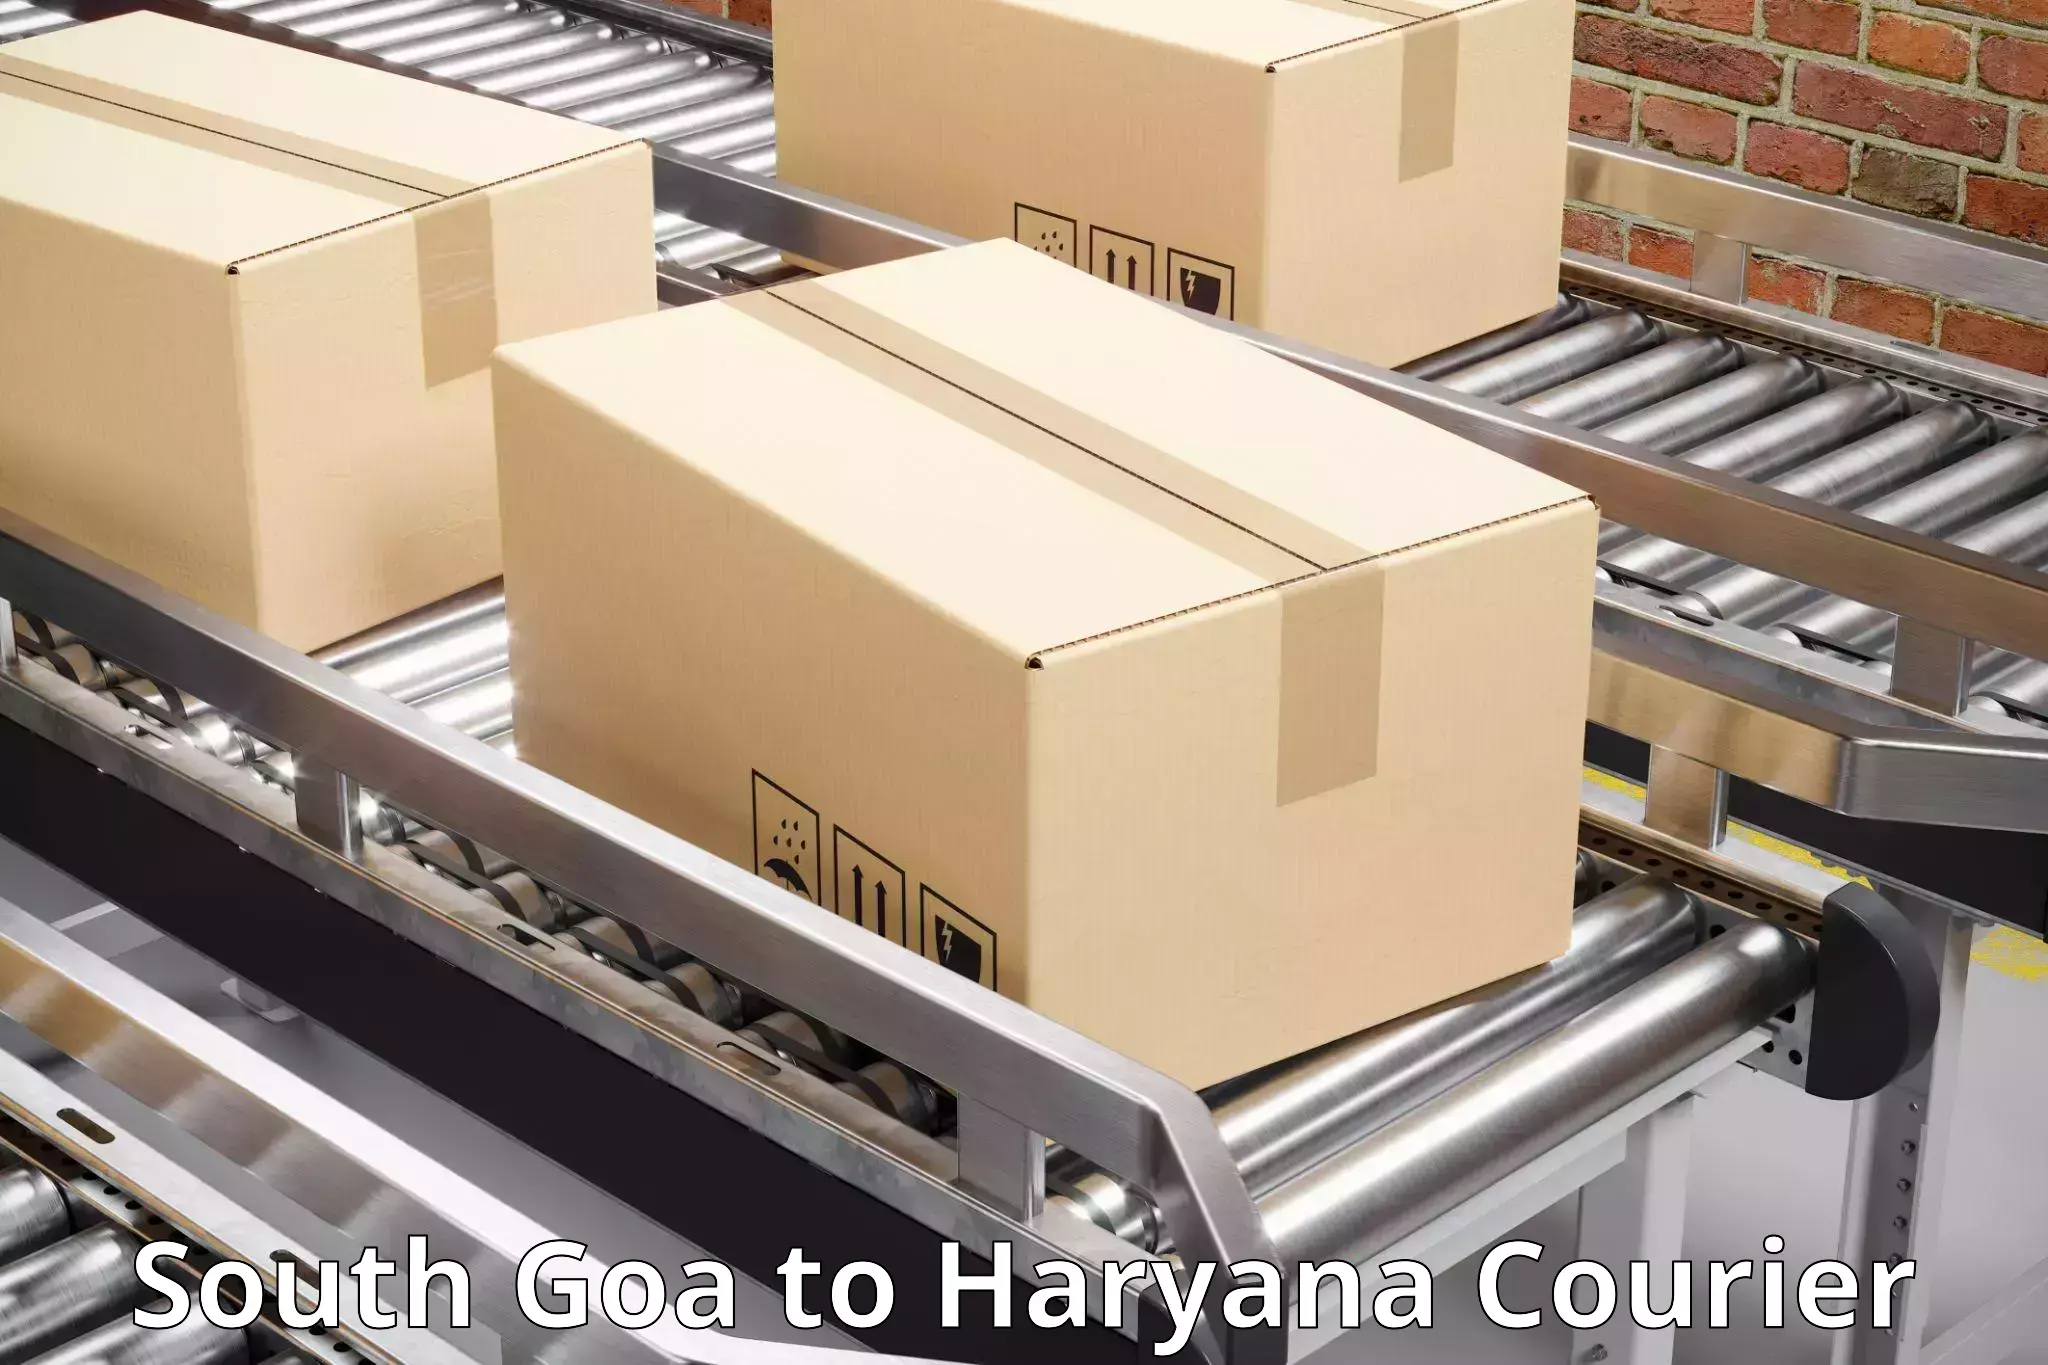 Customer-oriented courier services South Goa to Jind